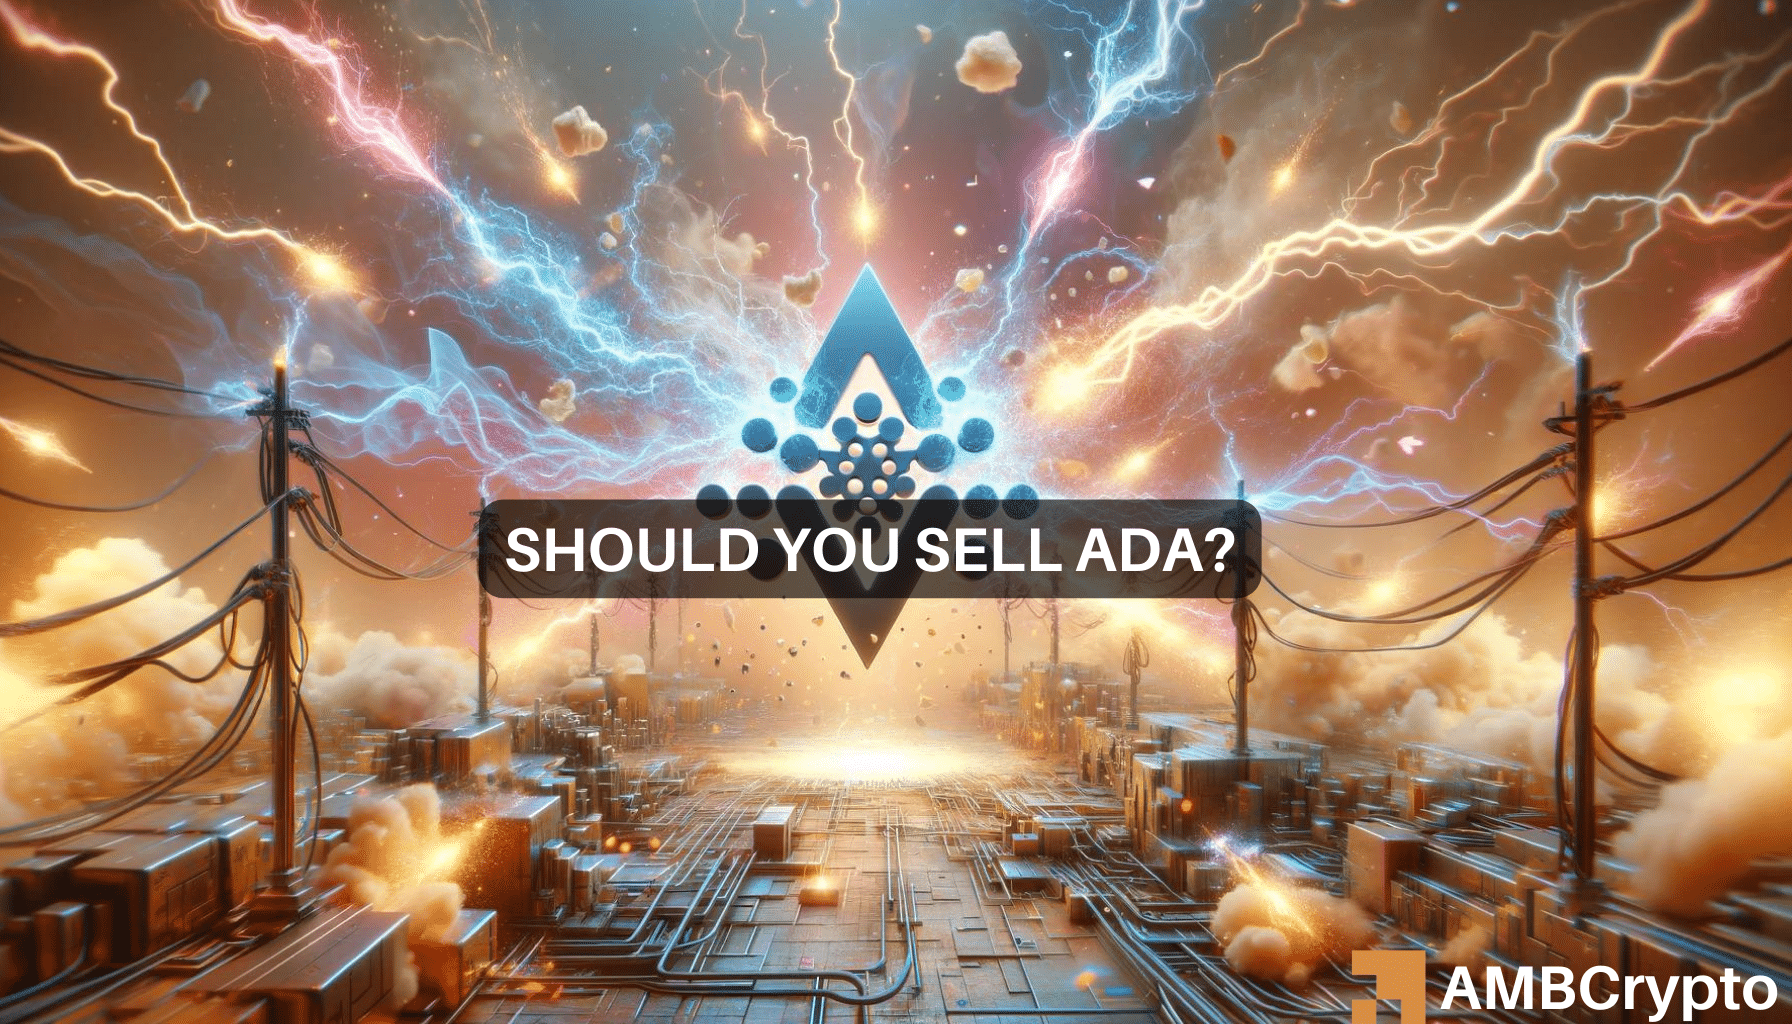 Cardano’s short positions increase: What should you do with your ADA?